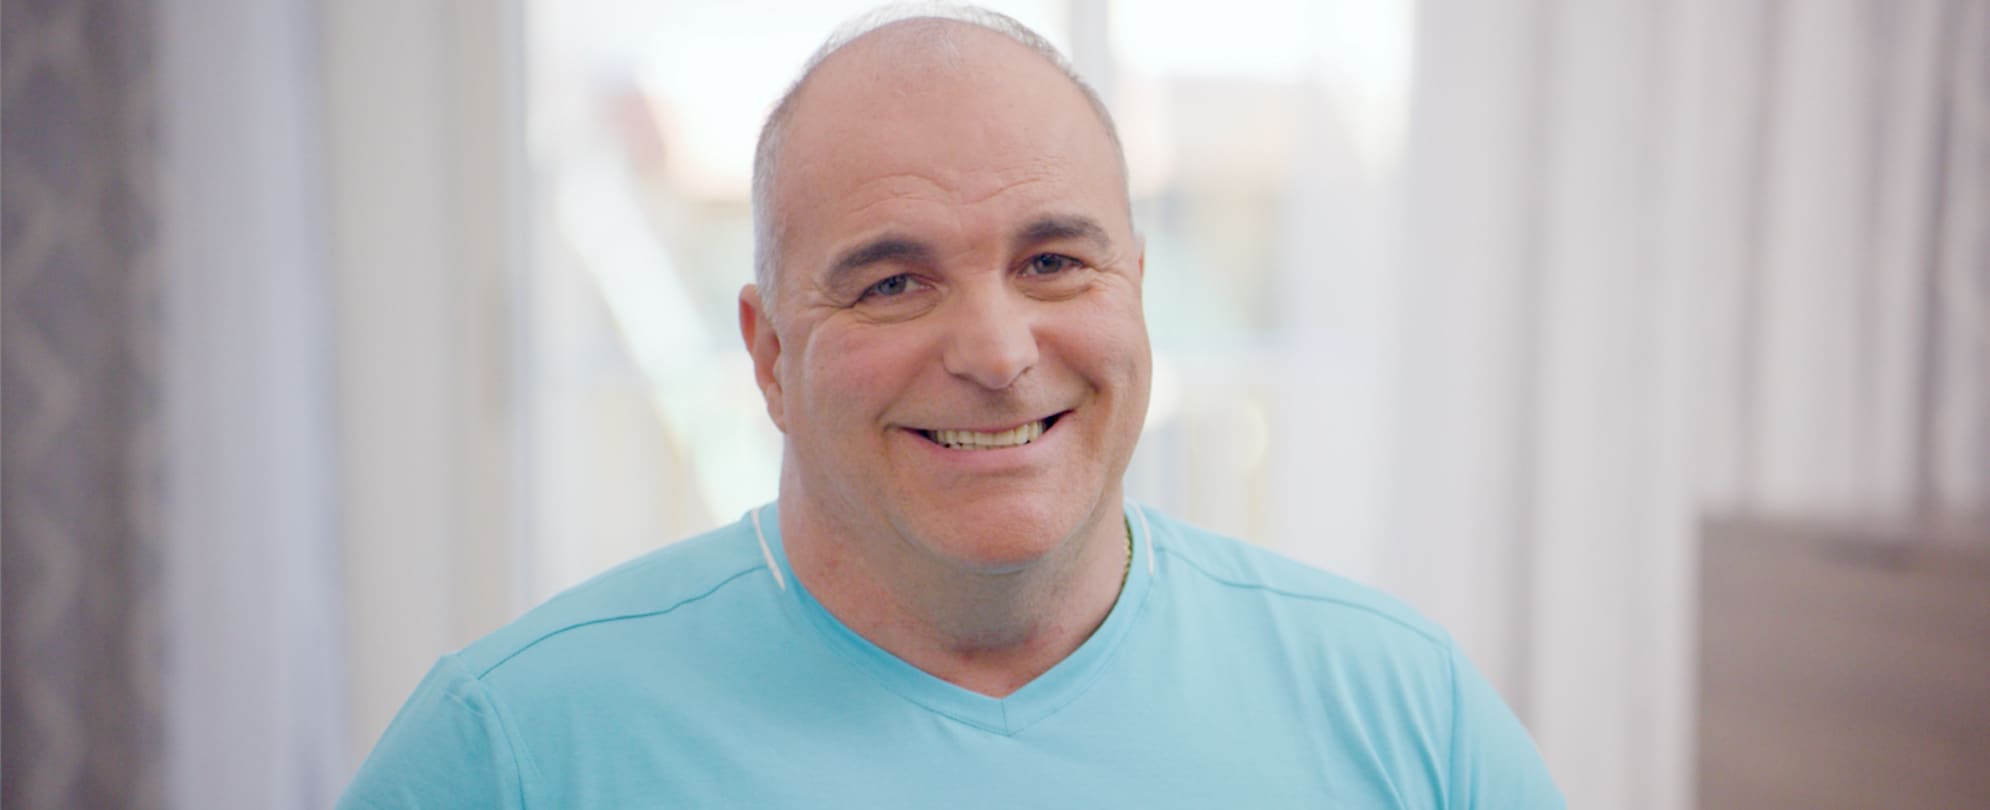 A timeshare owner wearing a bright blue t-shirt smiling directly into the camera